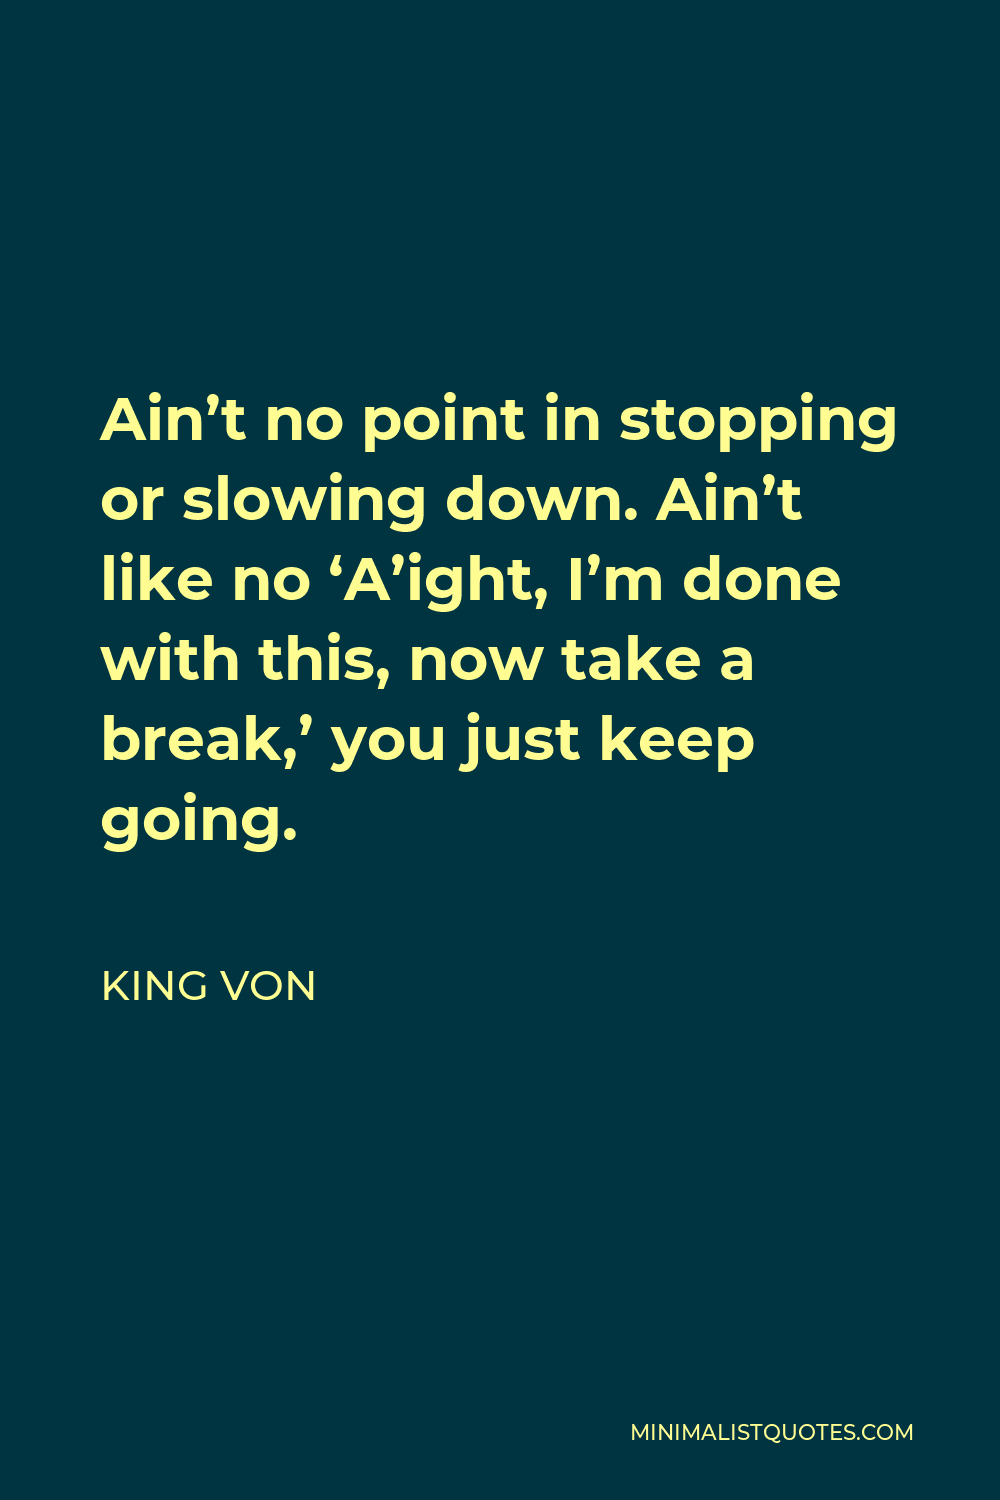 King Von Quote - Ain’t no point in stopping or slowing down. Ain’t like no ‘A’ight, I’m done with this, now take a break,’ you just keep going.